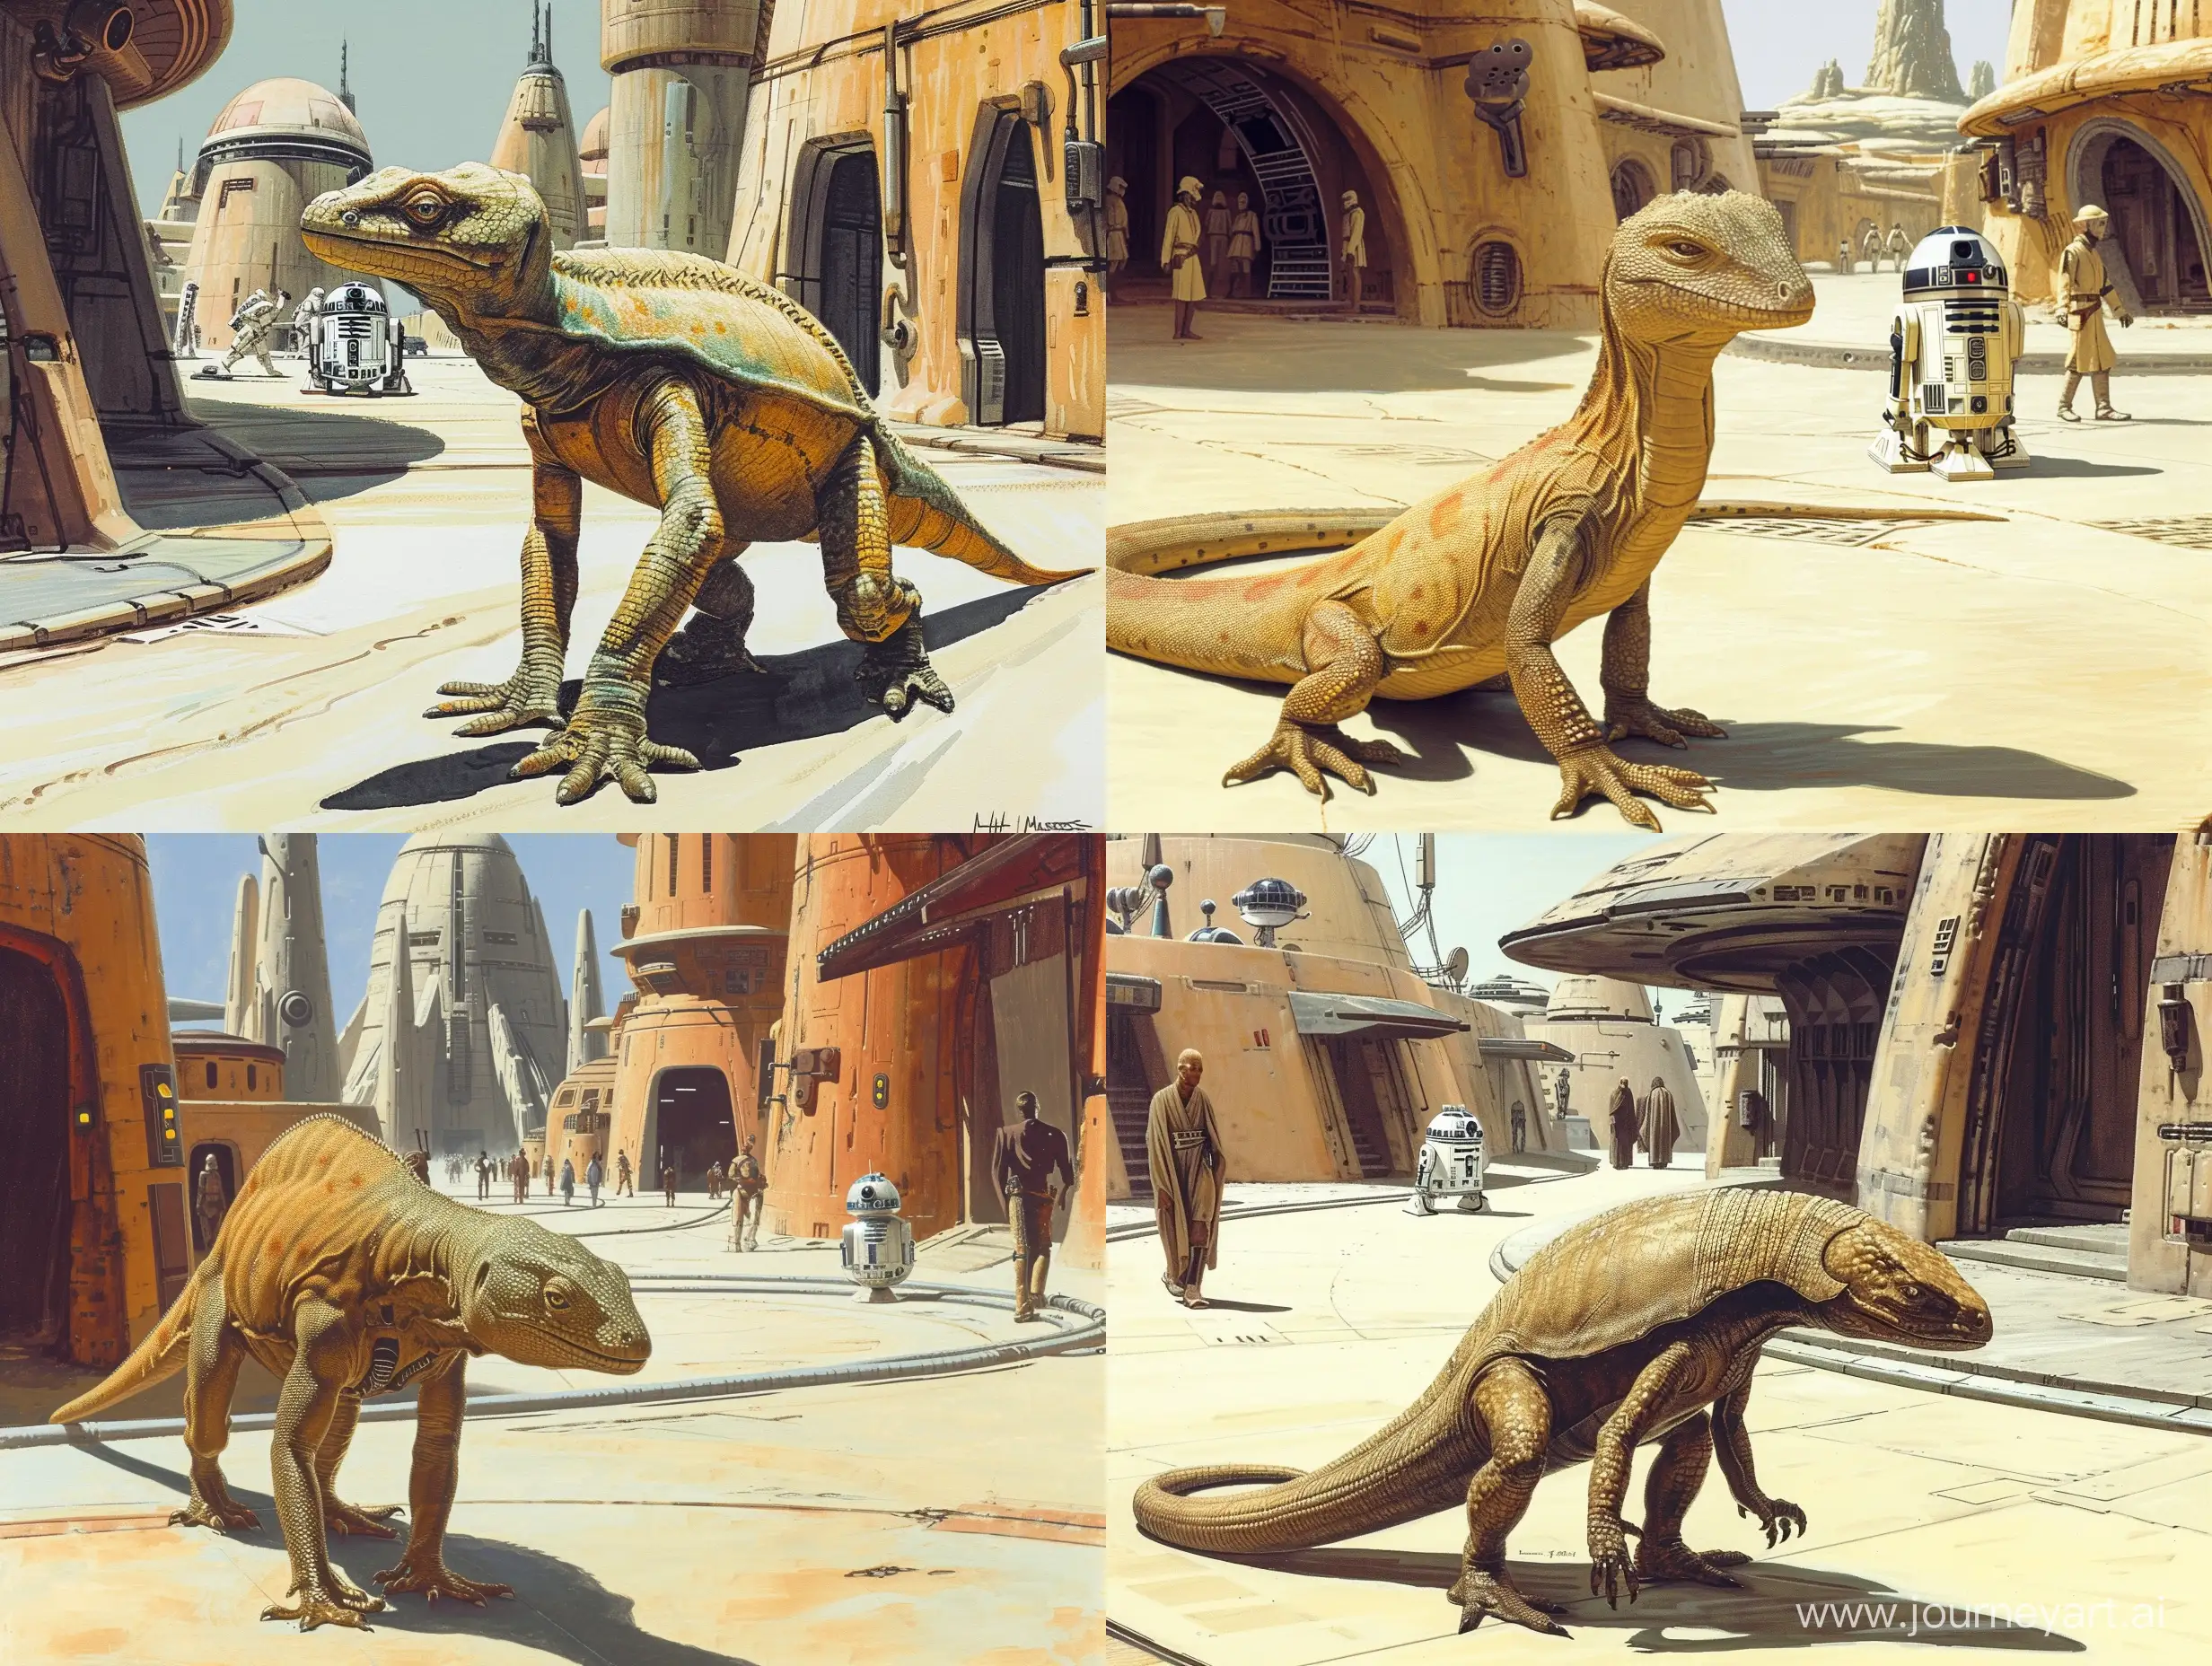 Concept art of an A reptilian lizard walking the streets of mos eisley by Ralph McQuarrie. astromech droid in background. retro star wars. Retro Science Fiction Art. In color.  